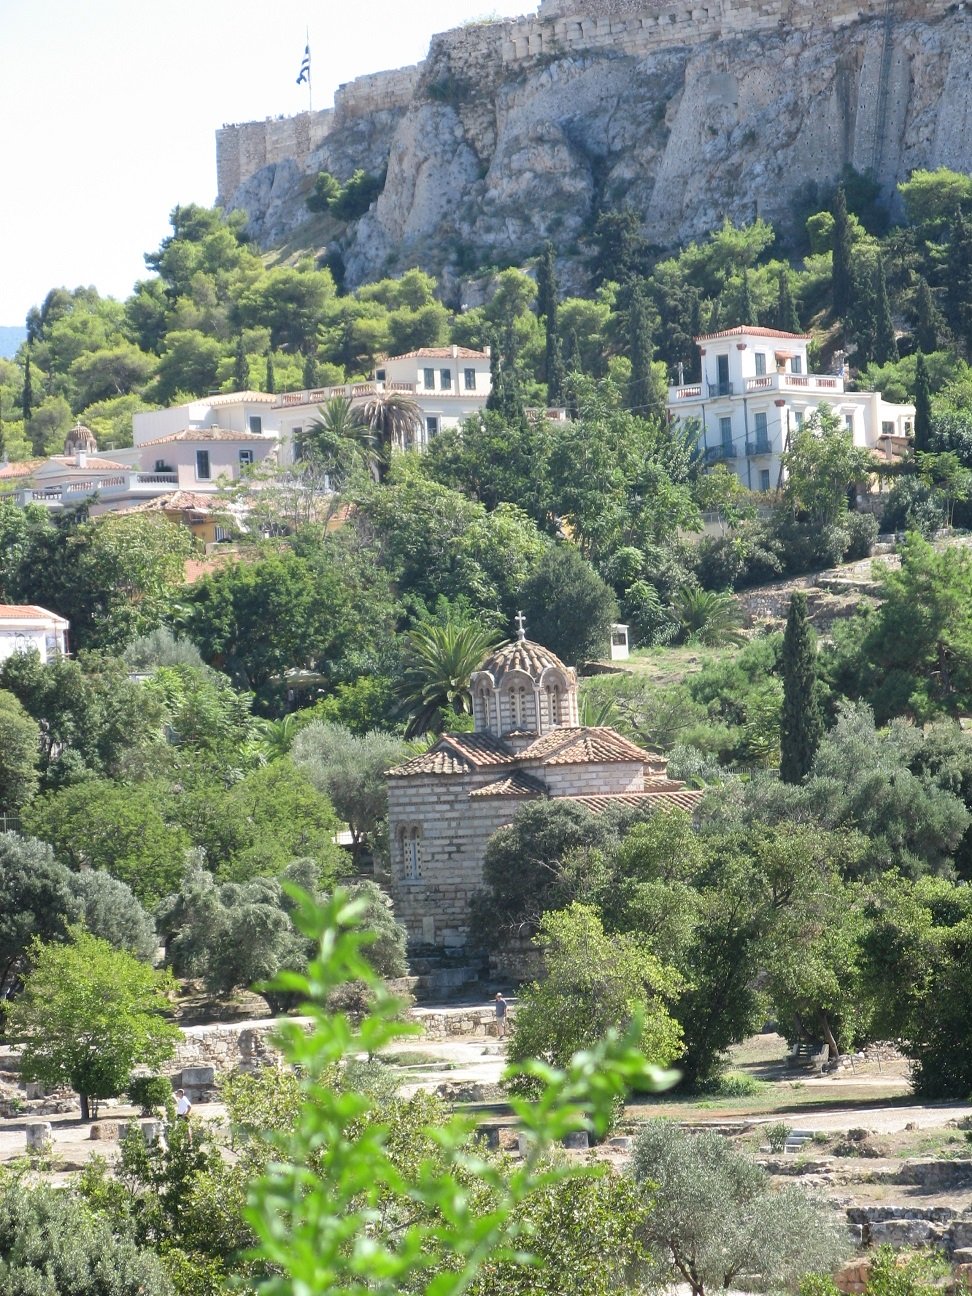 Explore the Ancient Agora of Athens at the base of the Acropolis - the green heart of the city